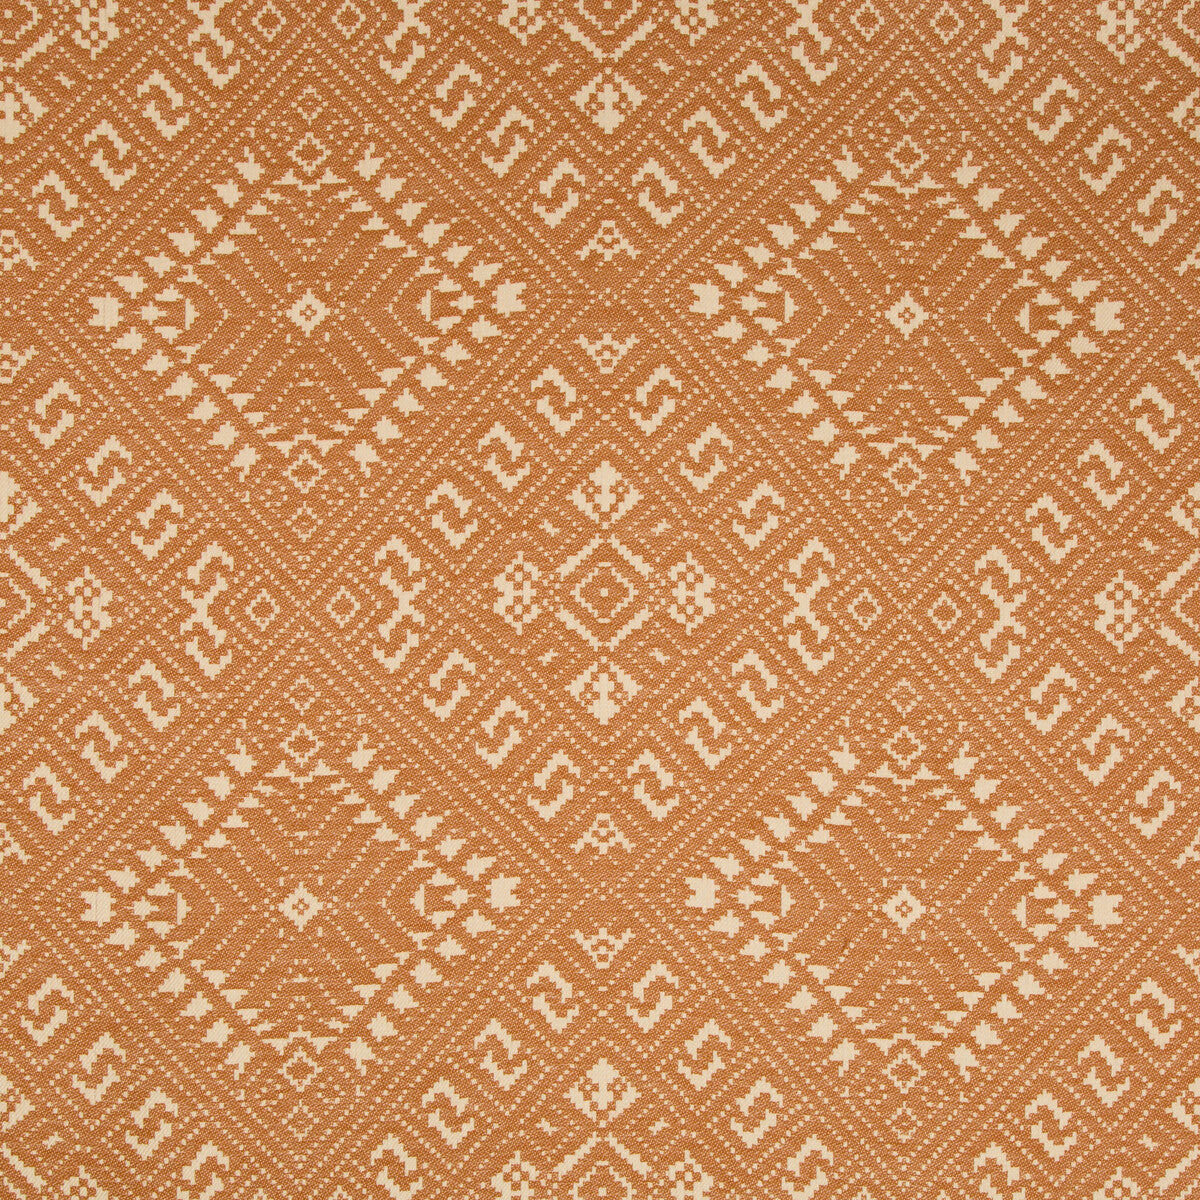 Penang fabric in spice color - pattern 34875.24.0 - by Kravet Design in the Oceania Indoor Outdoor collection